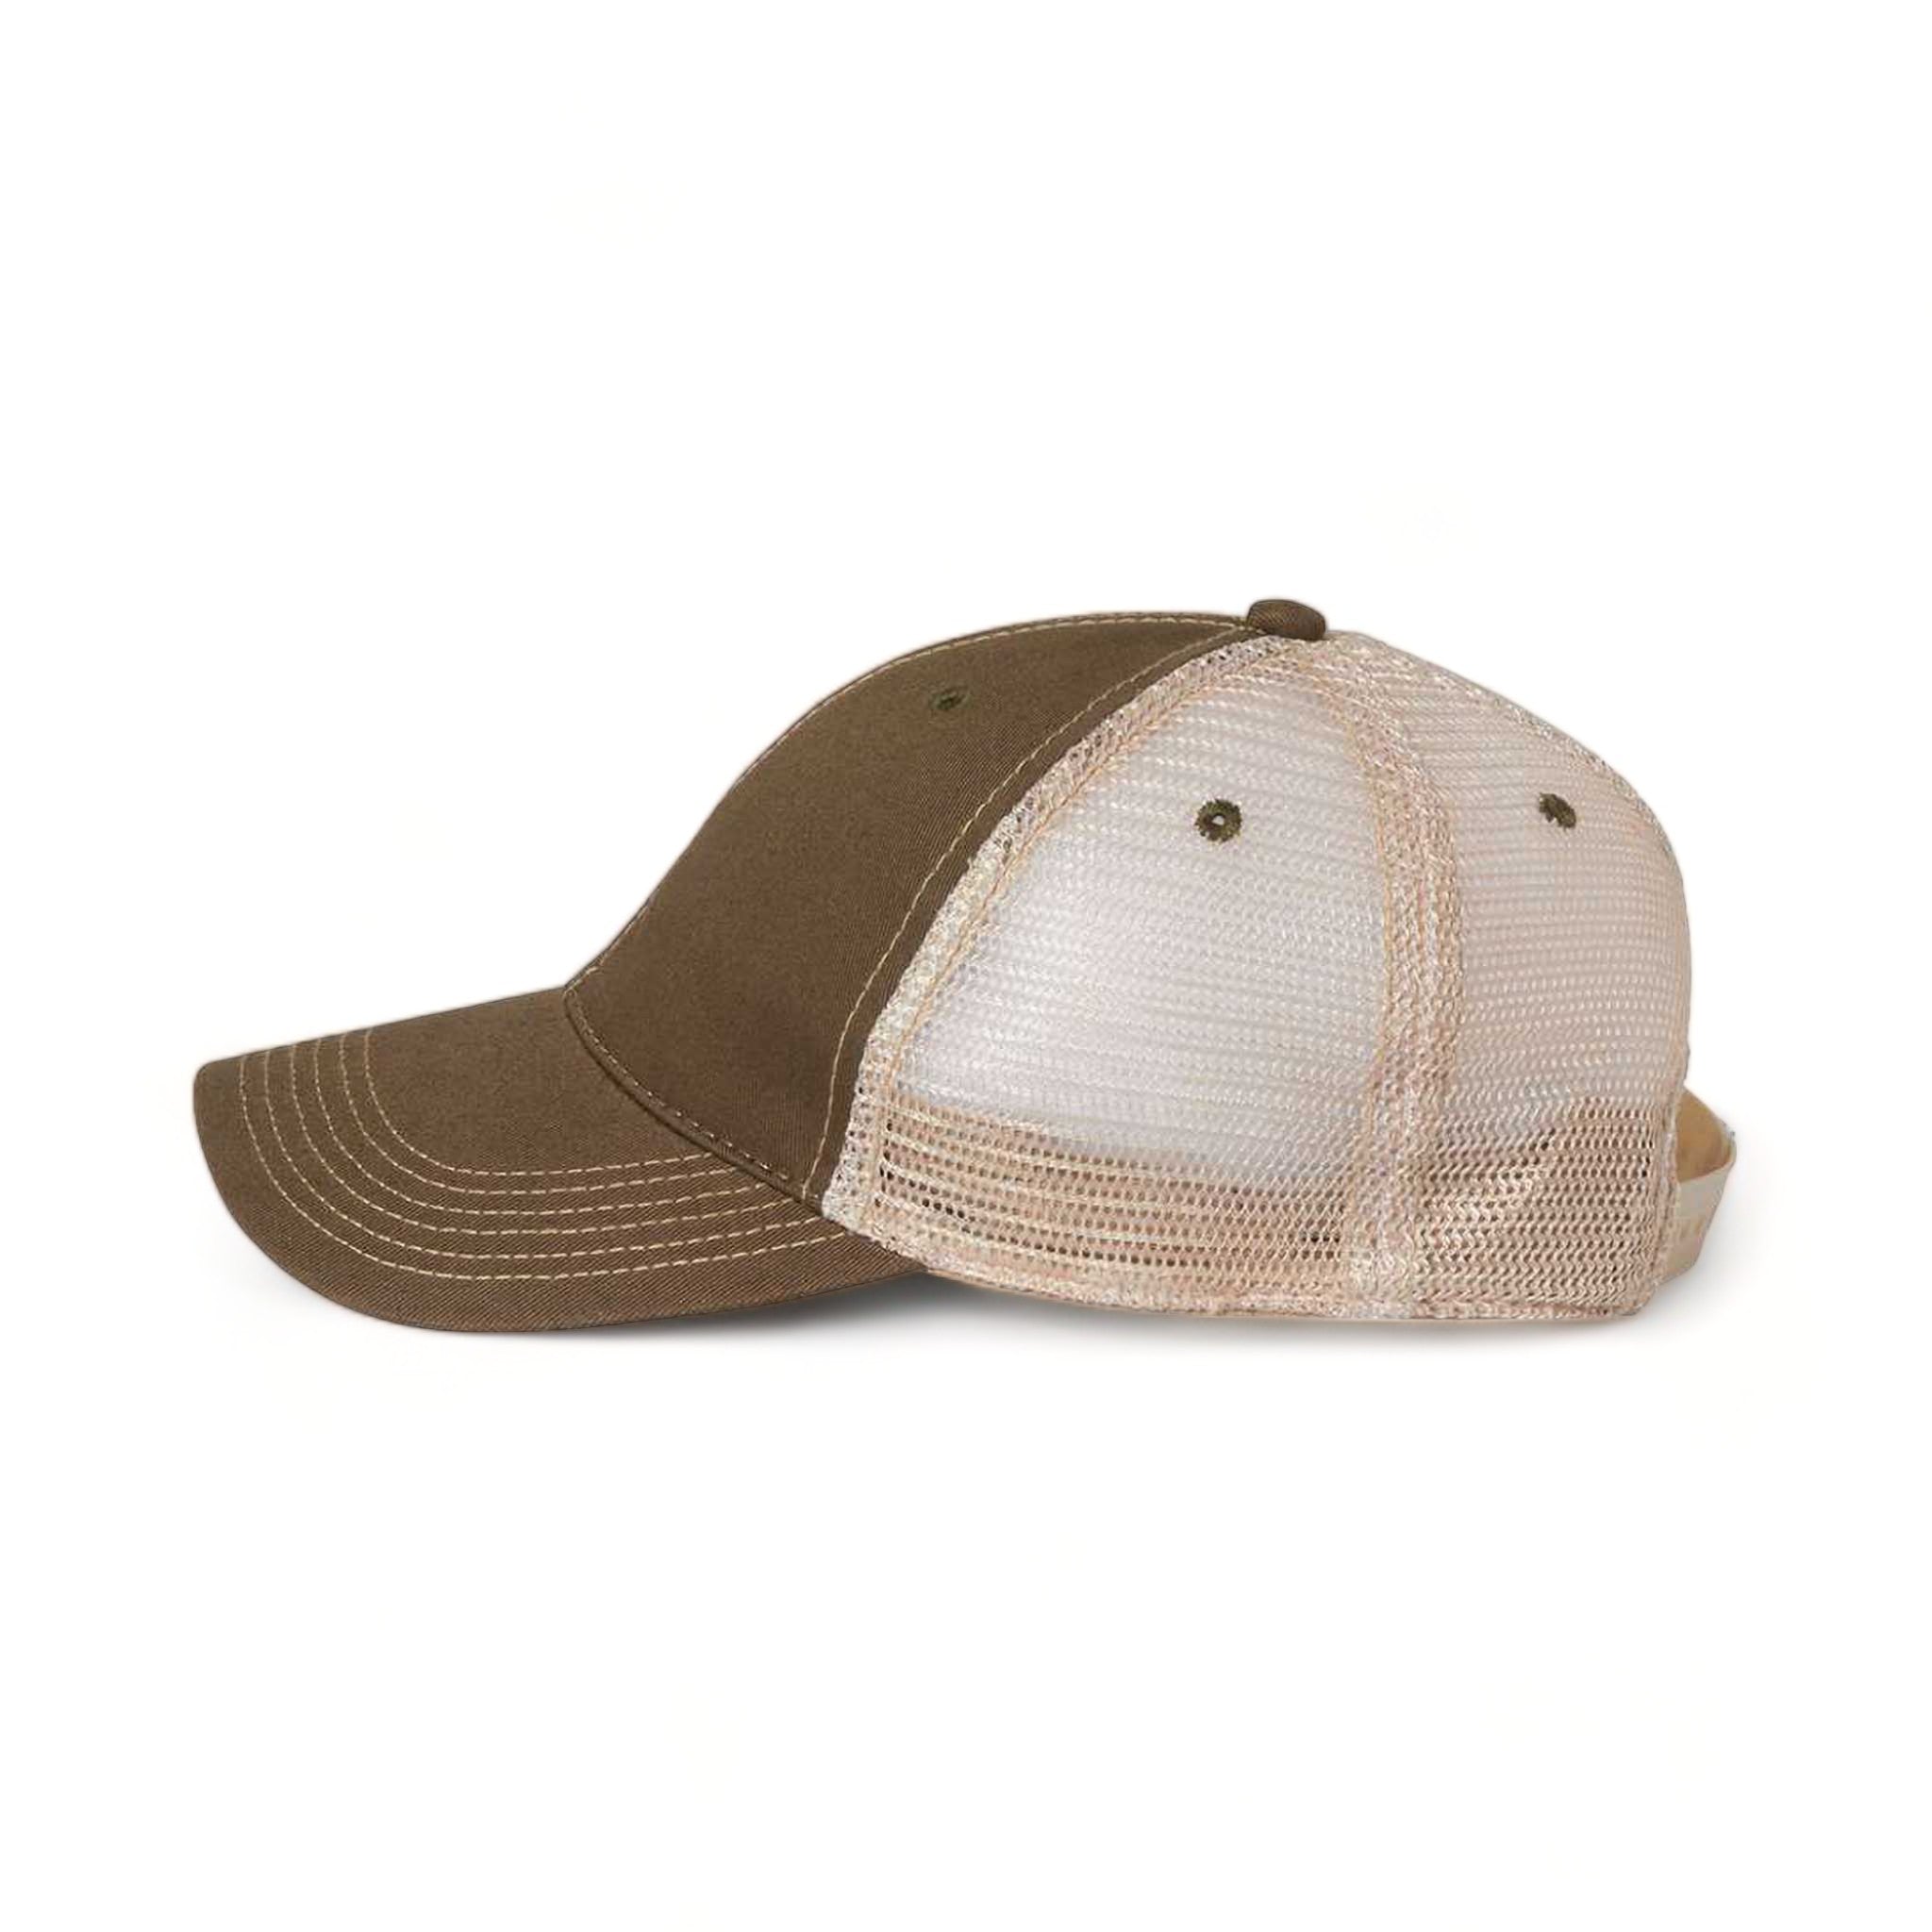 Side view of LEGACY OFA custom hat in olive and khaki